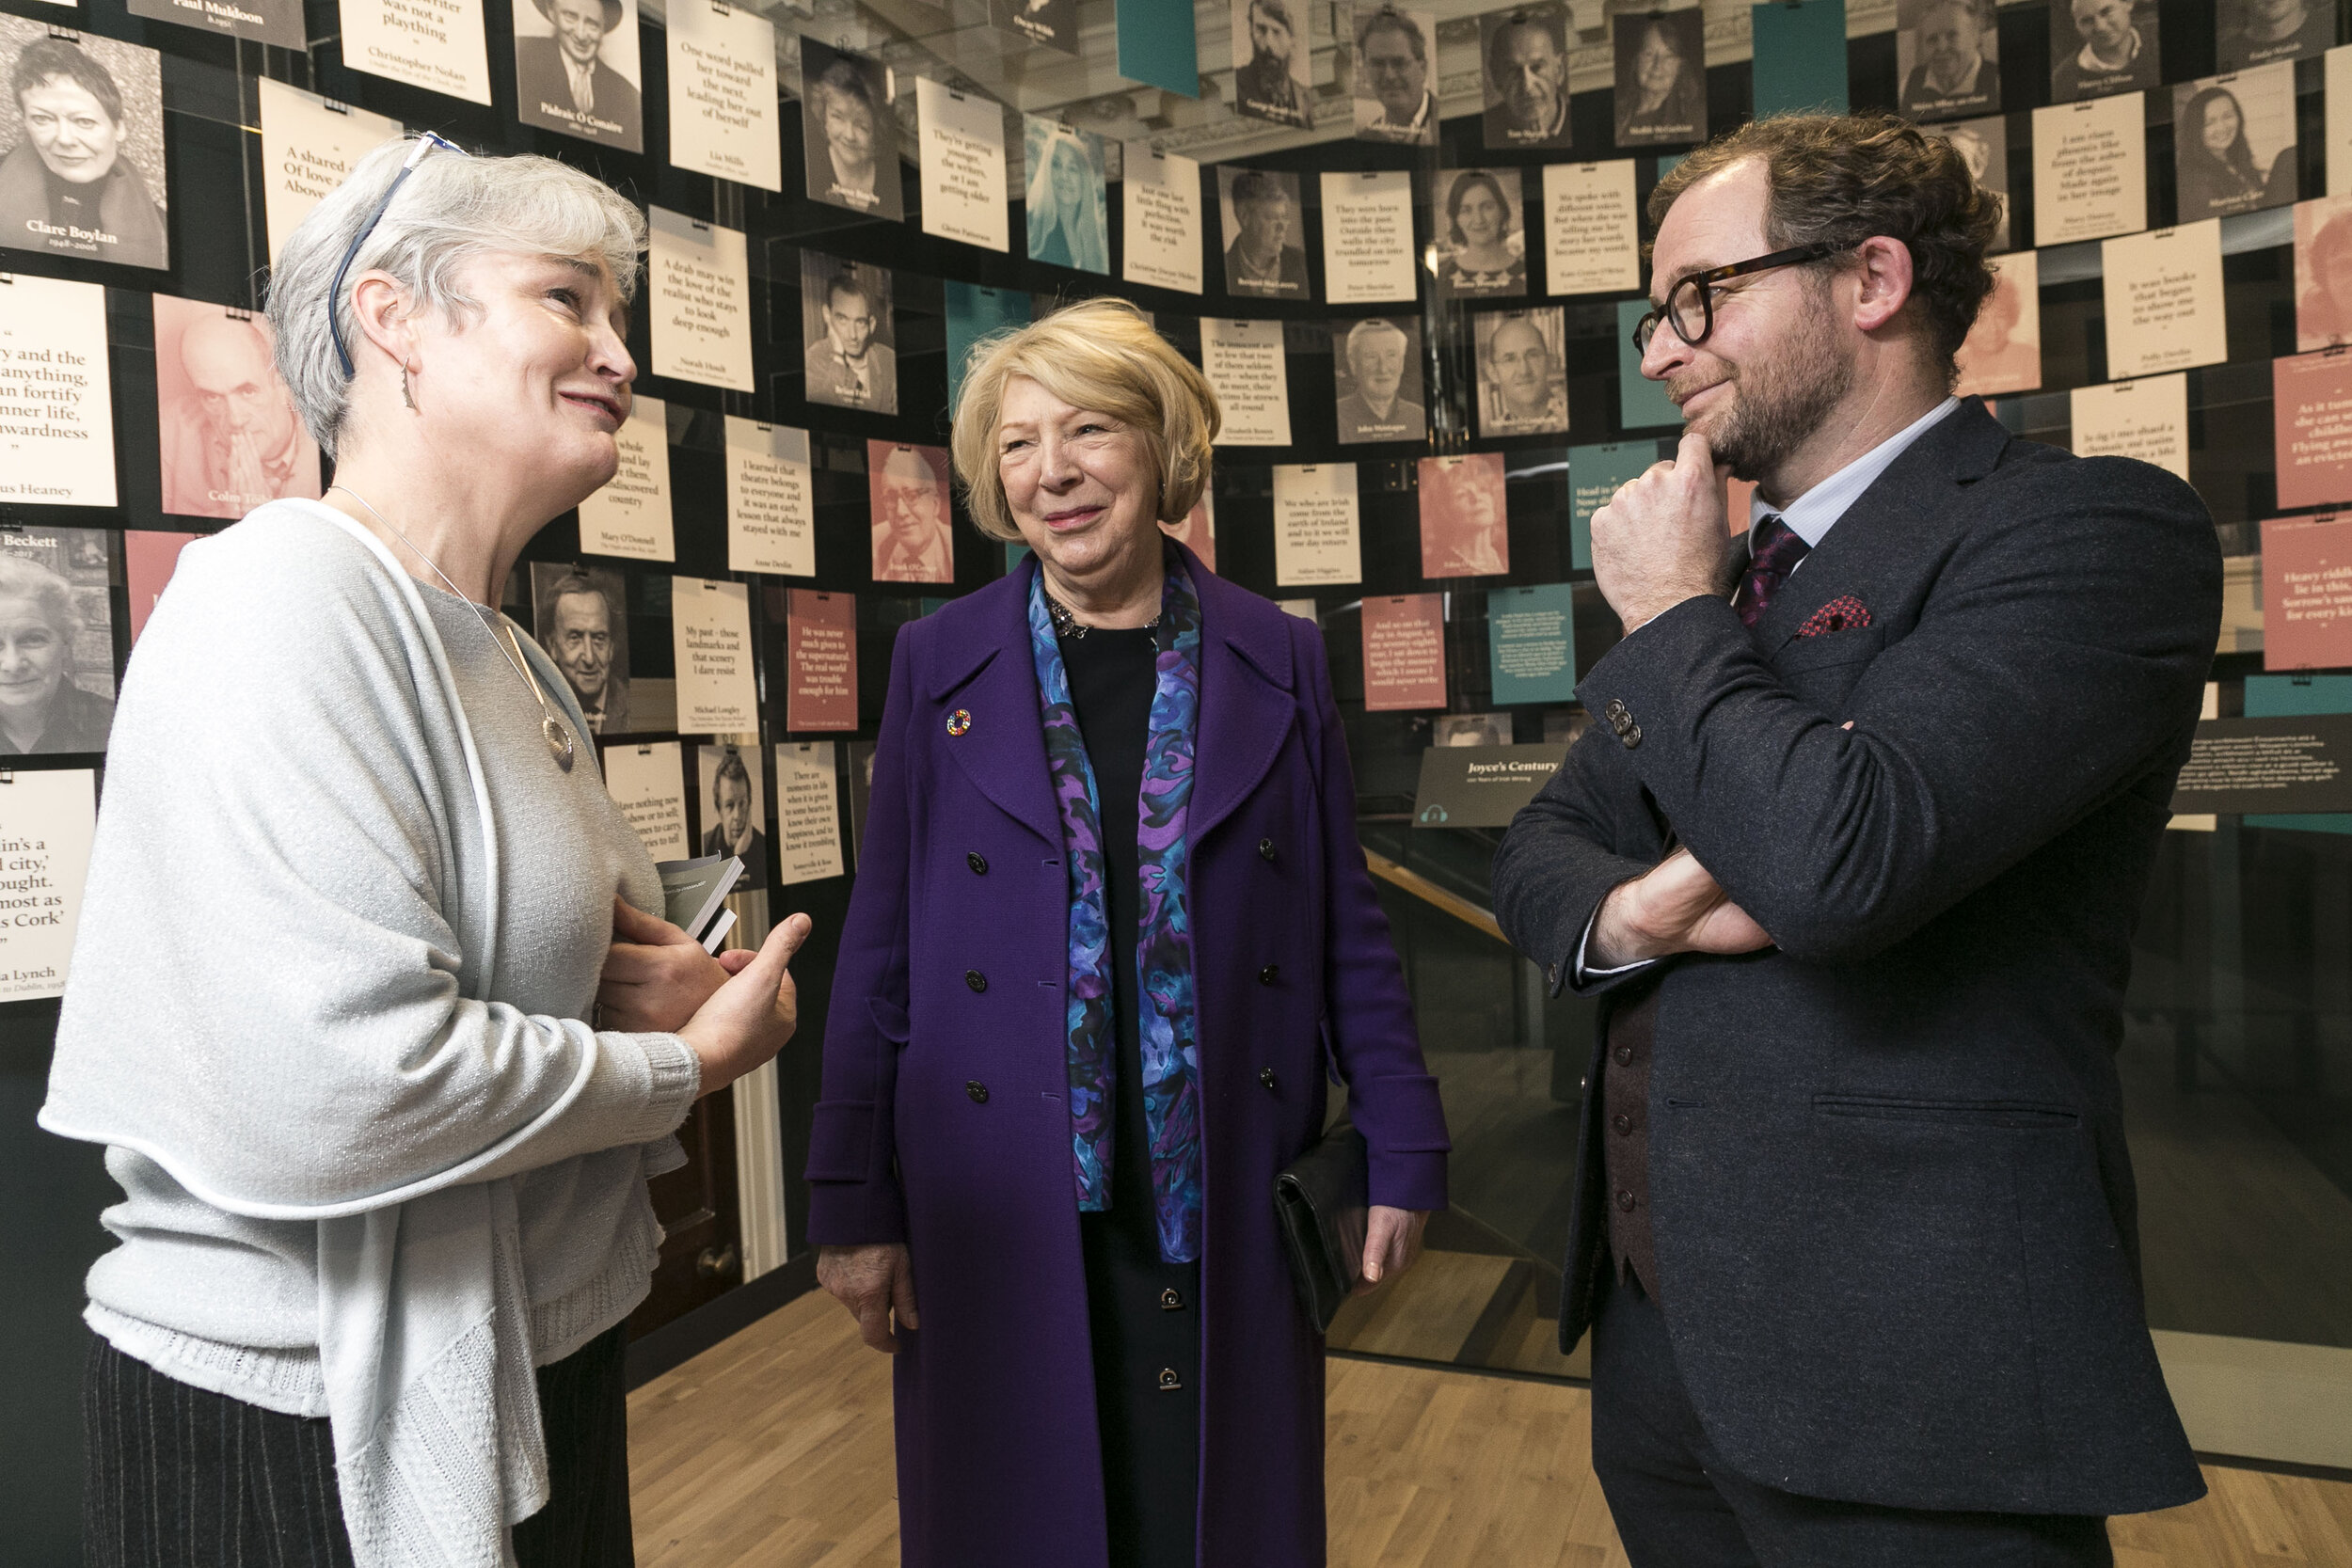  Sabina Higgins meeting Simon O'Connor Director of MoLI and Martina Hamilton on her arrival.    Hamilton Gallery / MoLi / DFAT - exhibition opening by Sabina Higgins of "Eva Gore-Booth 93 Irish women artists respond to her life and work", part of Bri